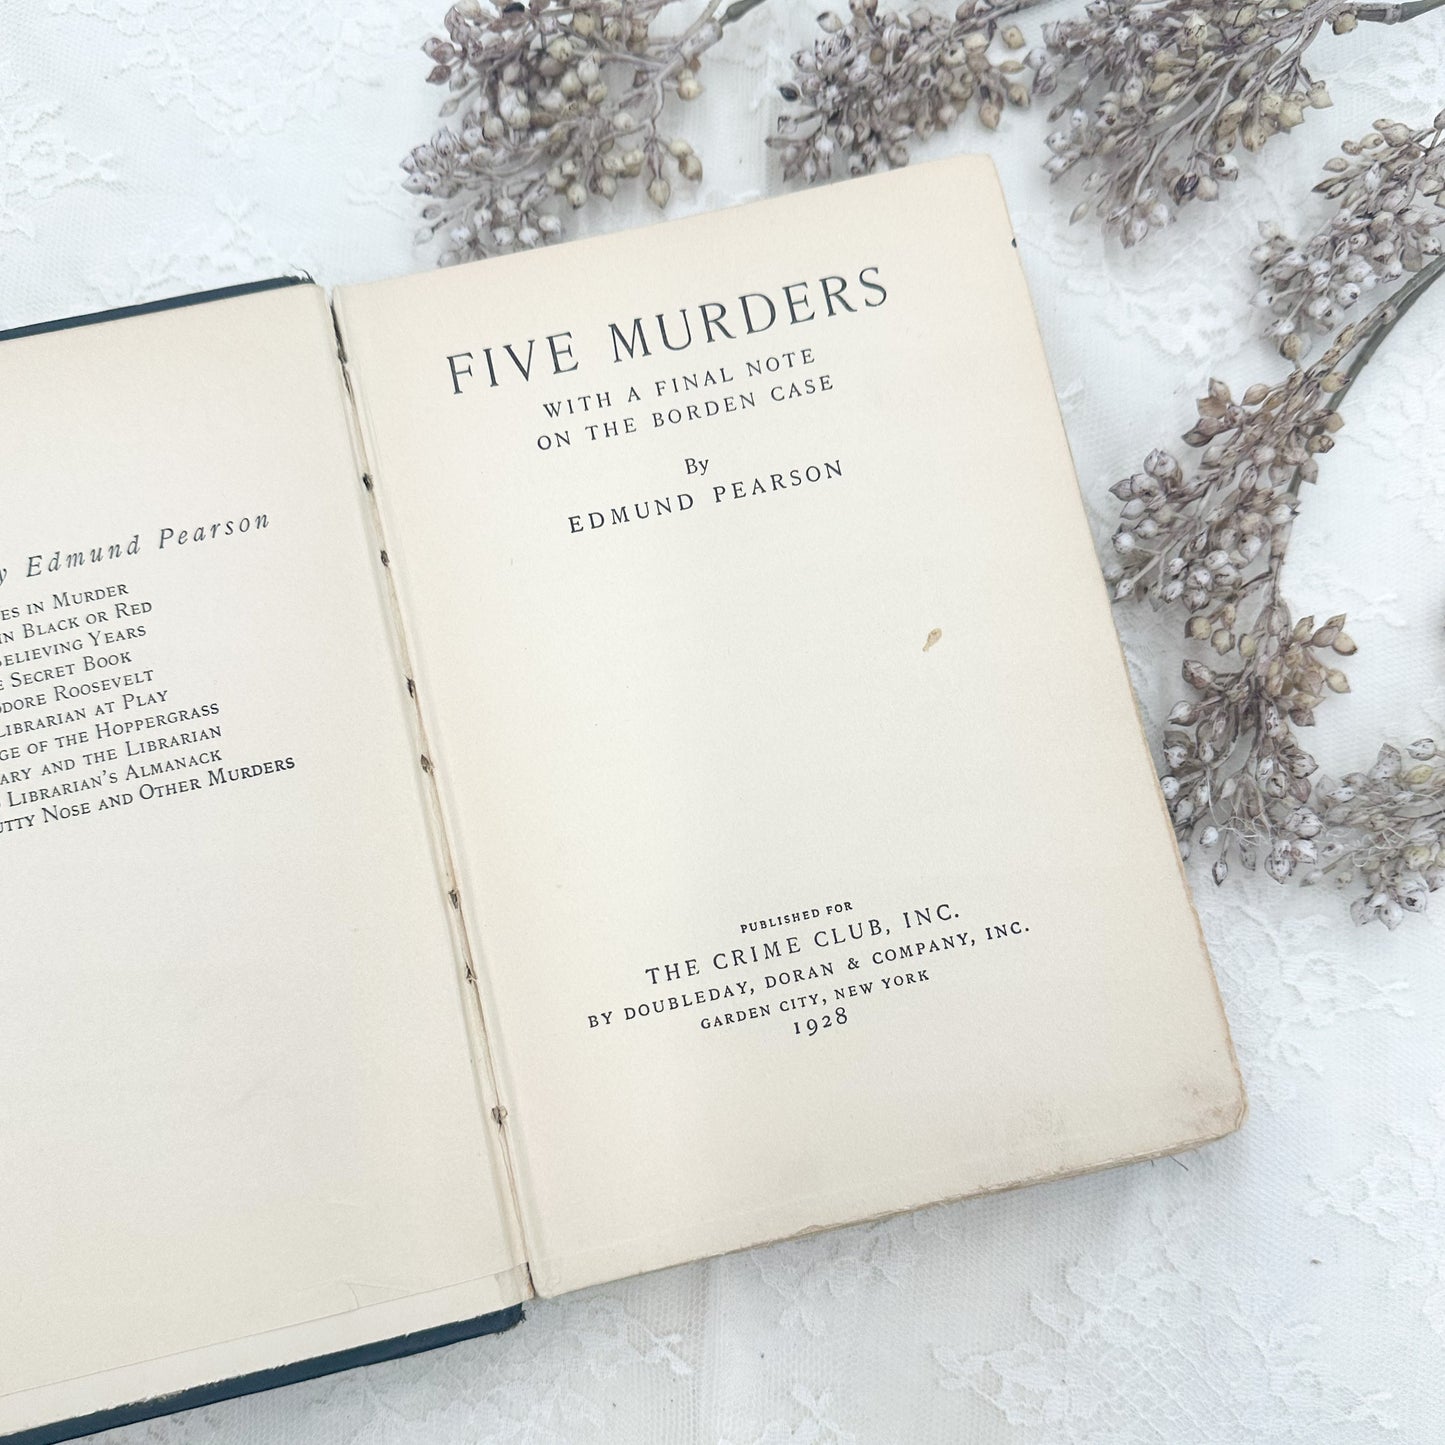 Five Murder with a Final Note on the Borden Case by Edmund Pearson